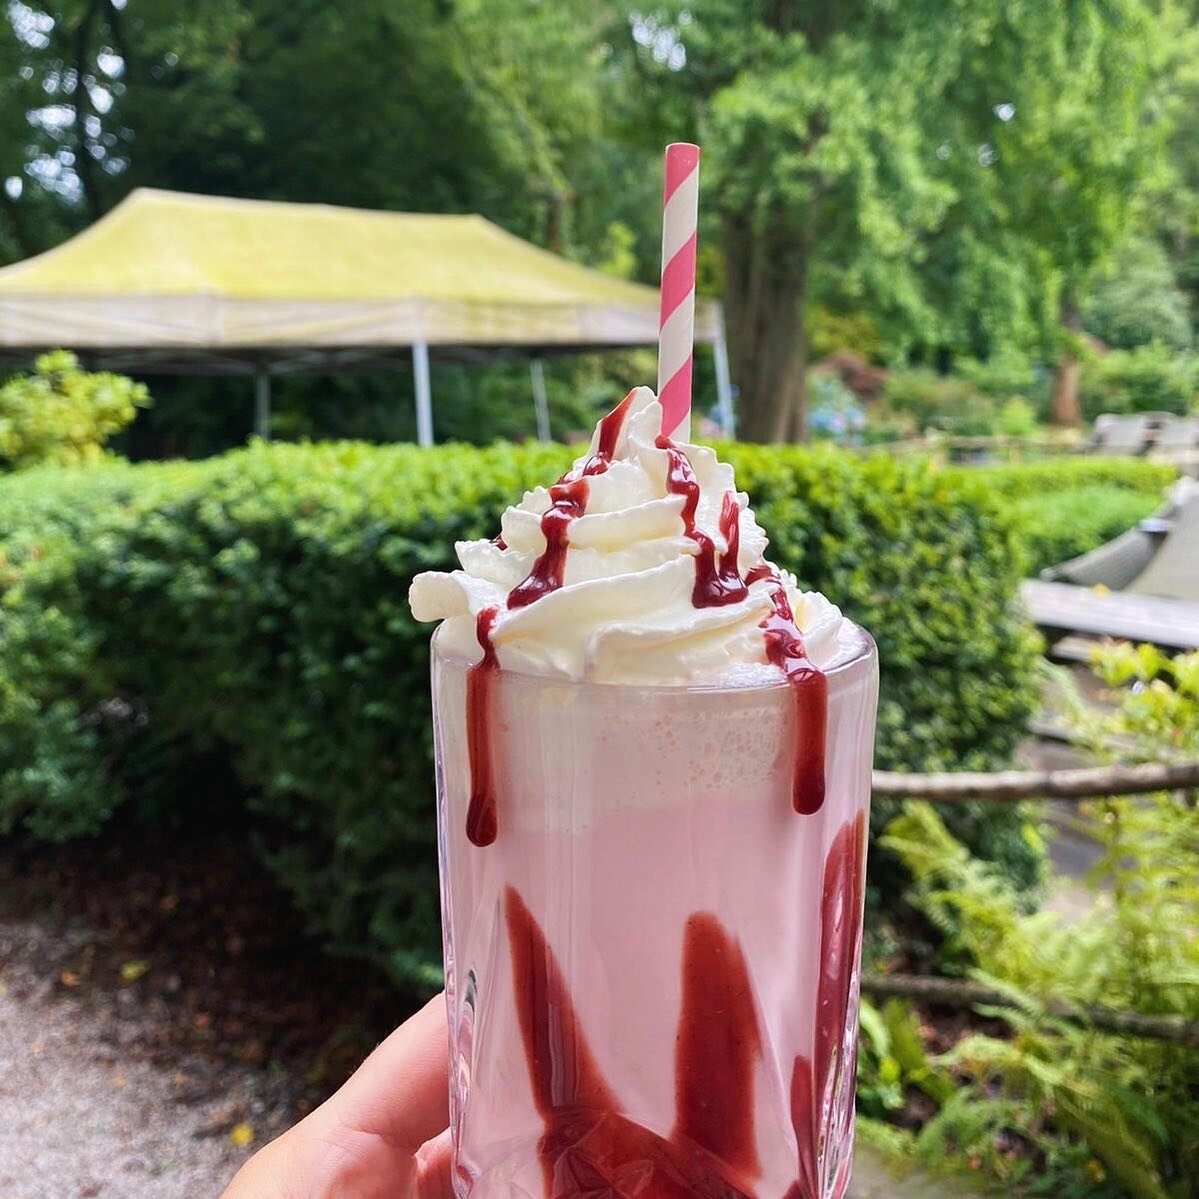 sʜᴀᴋᴇ ɪᴛ ᴜᴘ. 

And try one of our yummy milkshakes when you next visit us! All of the classic flavours finished with plenty of whipped cream&hellip; delicious 🍓
.
.
.
.
.

#wyresdale #wyresdalepark #visitwyresdalepark #applestore #applestorecafe #ca